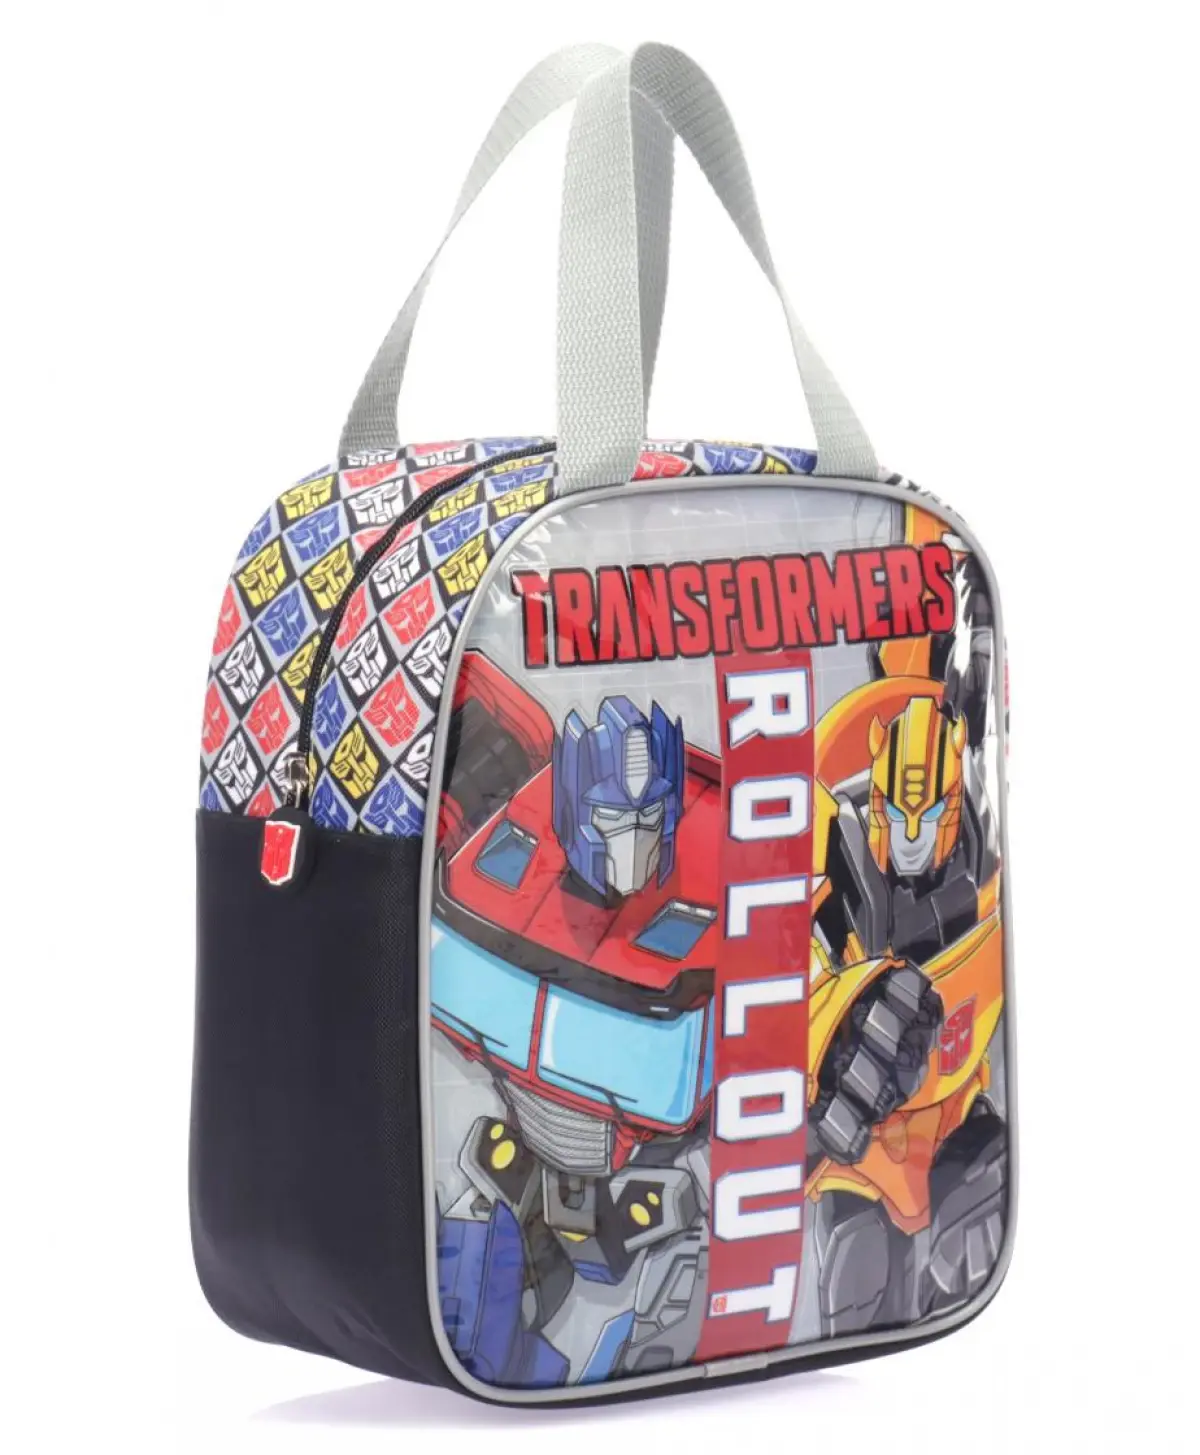 Striders Transformers Lunch Bag - Trending, Stylish, and Insulated-Packed